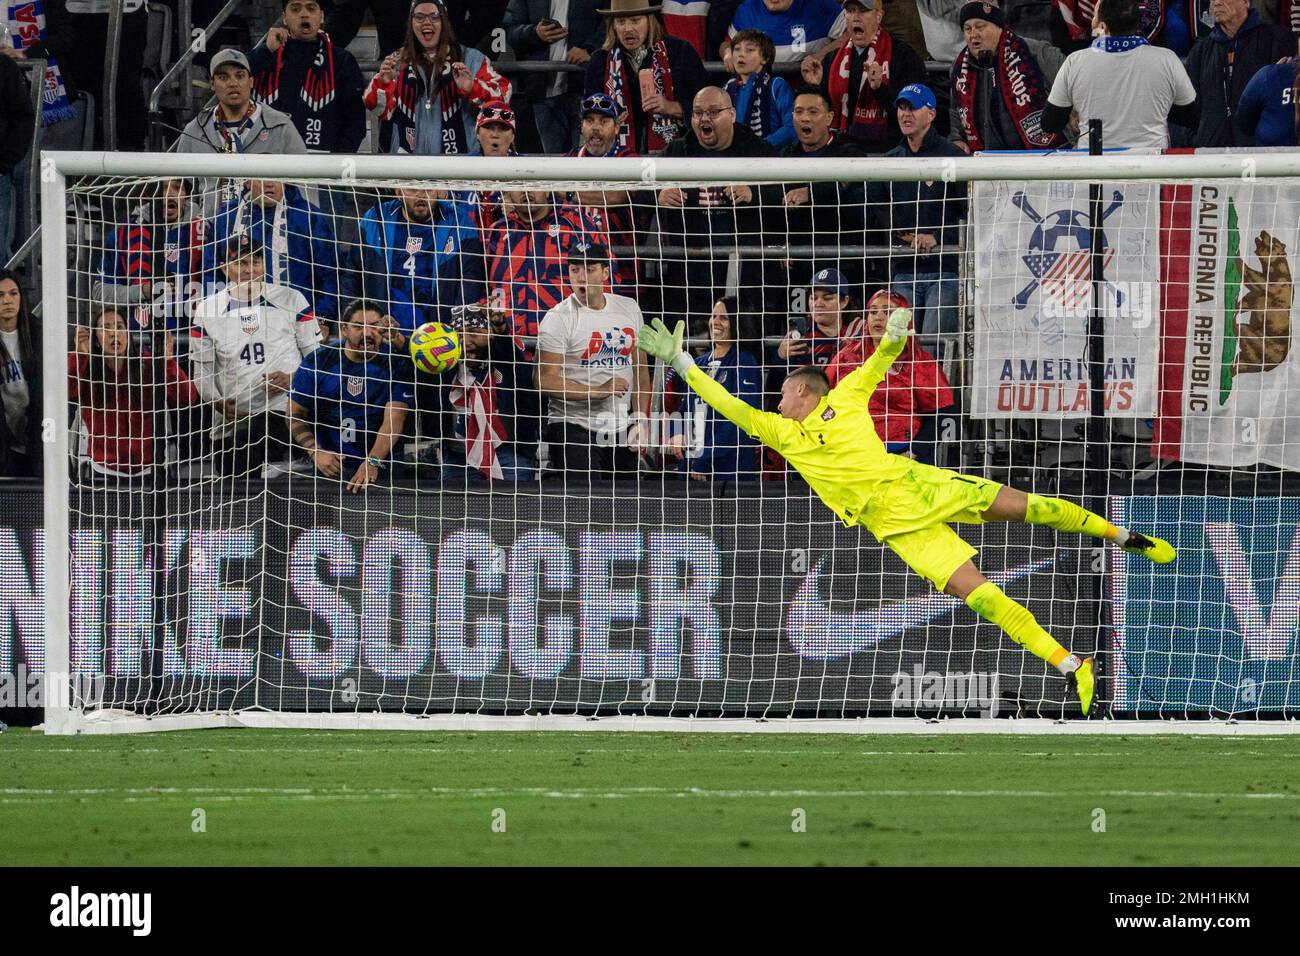 Serbia goalkeeper Dragan Rosić (12) watches a goal by United States of America forward Brandon Vázquez (8) during an international friendly match, Wed Stock Photo